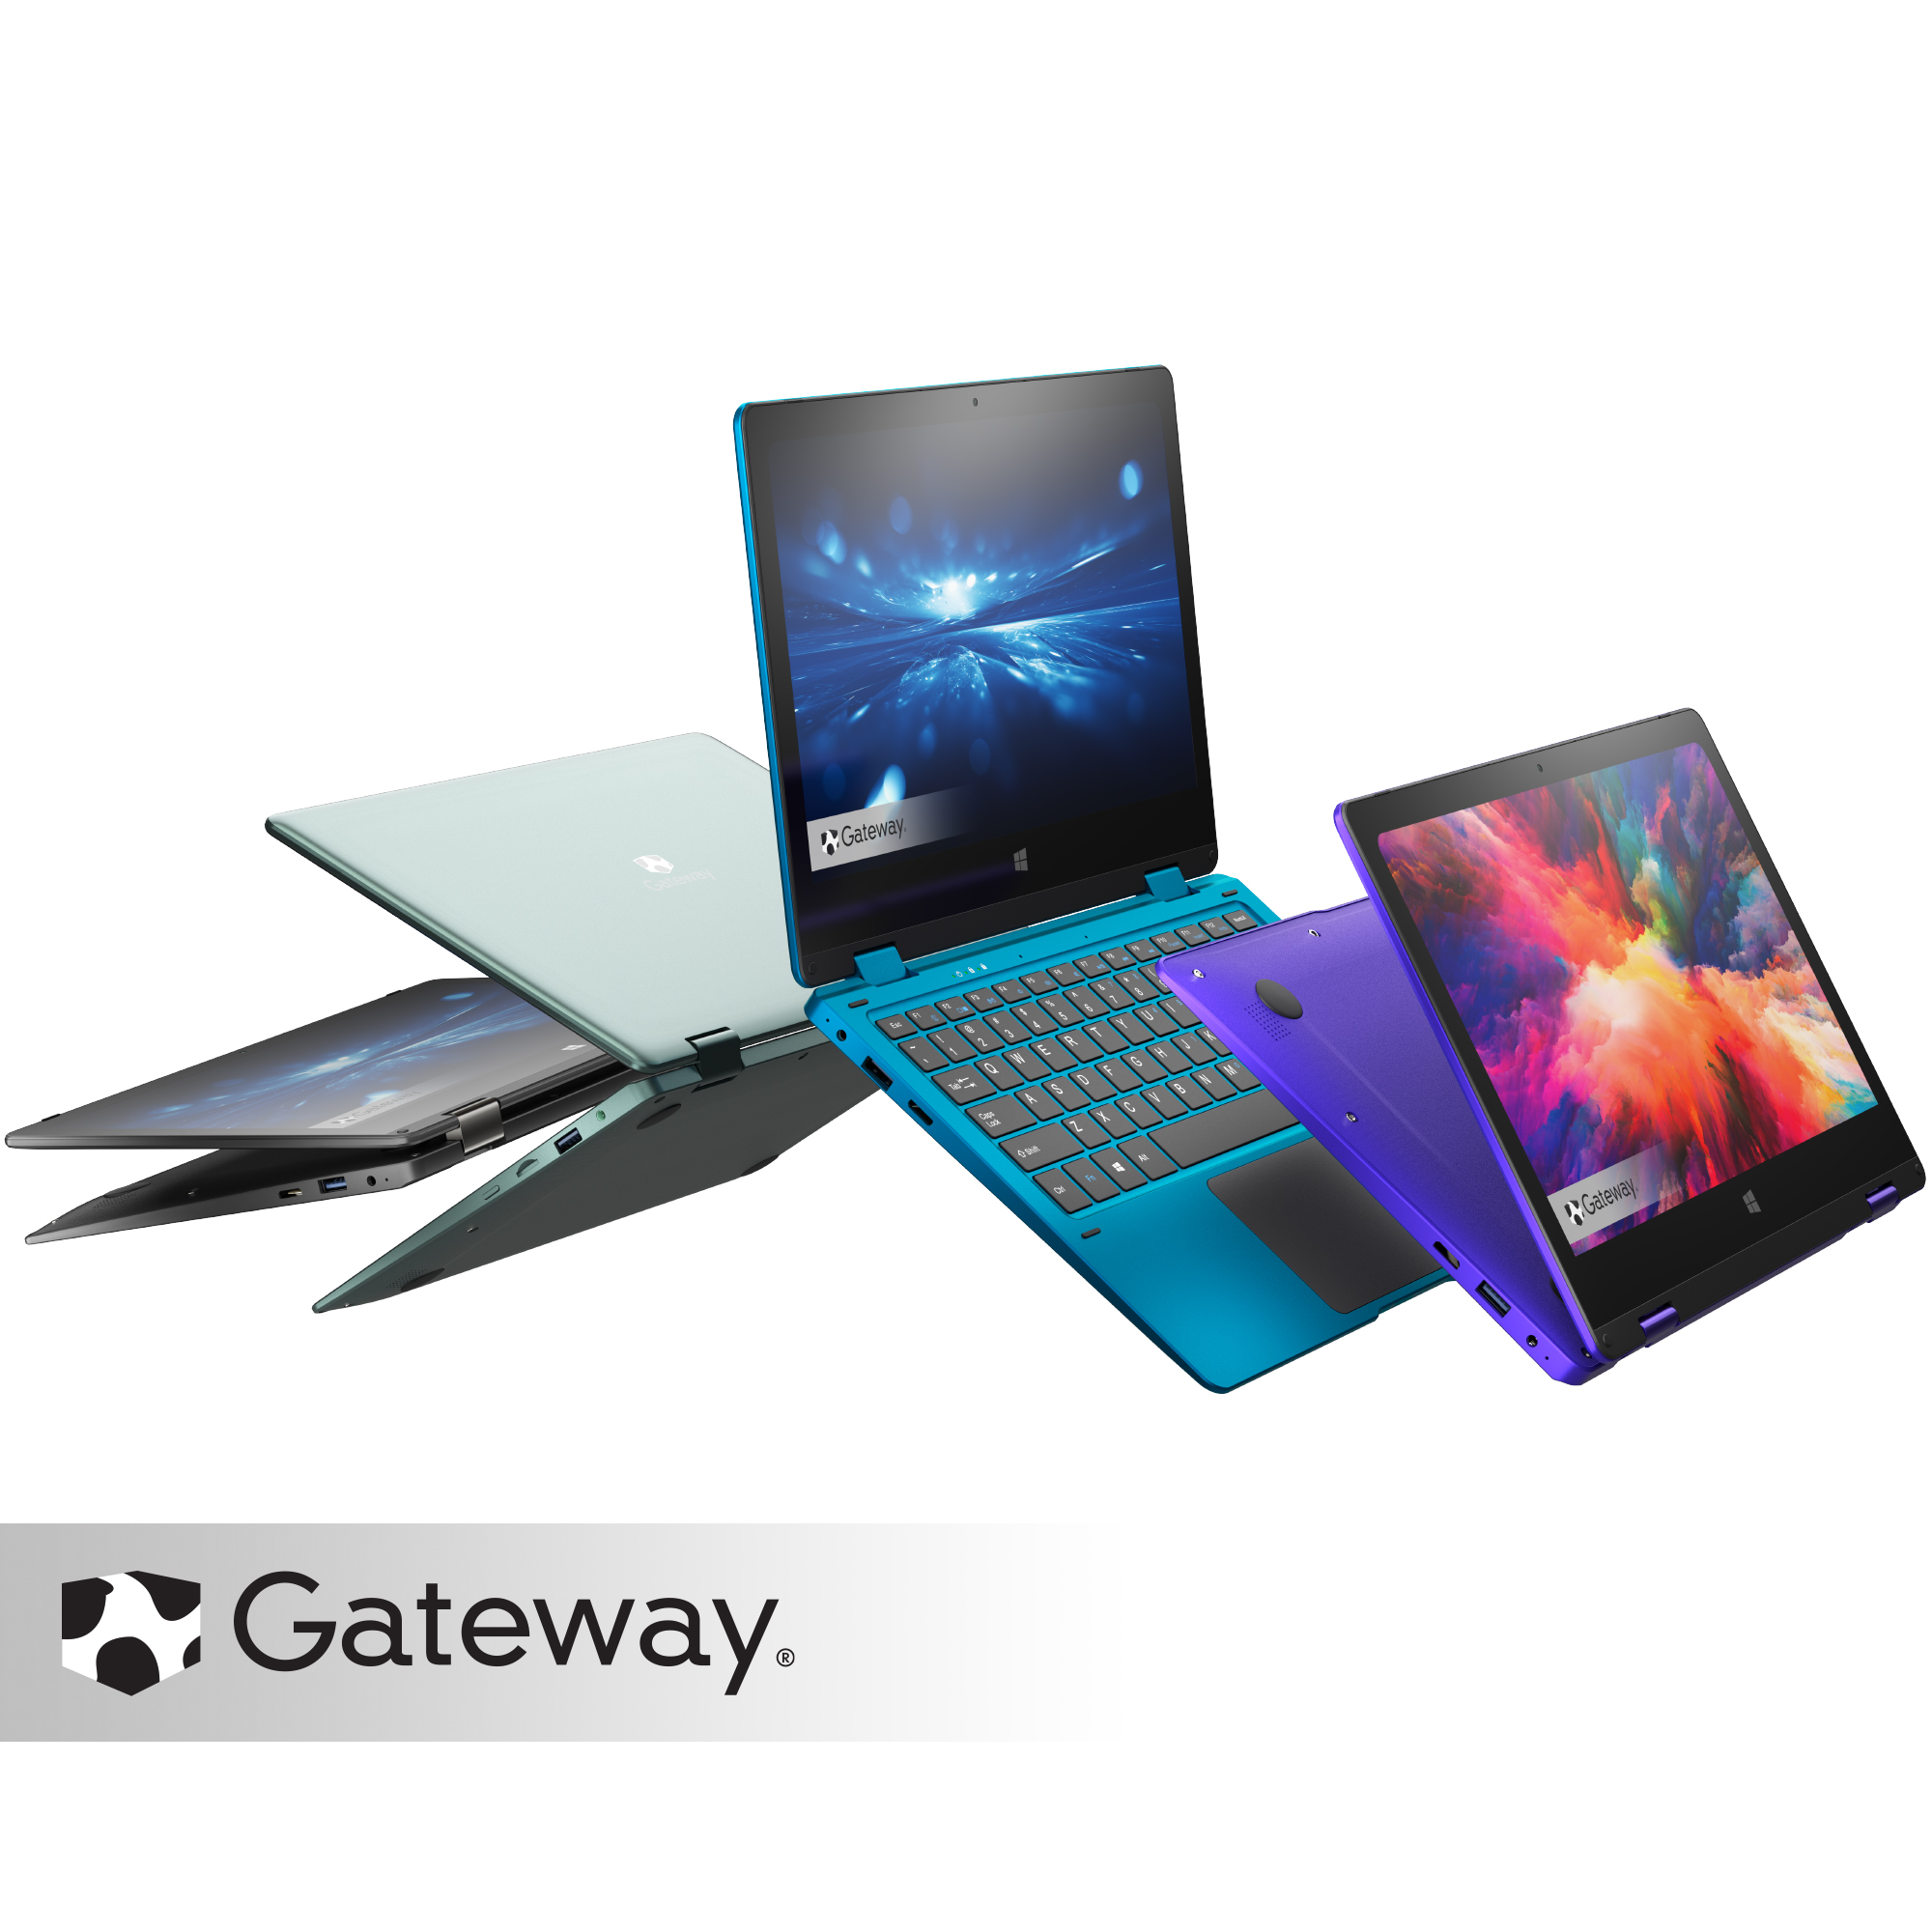 Restored Gateway GWTC116-2BL 11.6" HD Touchscreen Laptop Celeron N4020 1.1GHz Intel UHD Graphics 600 4GB RAM 64GB SSD Windows 10 Home in S Mode Blue (Refurbished) - image 1 of 13